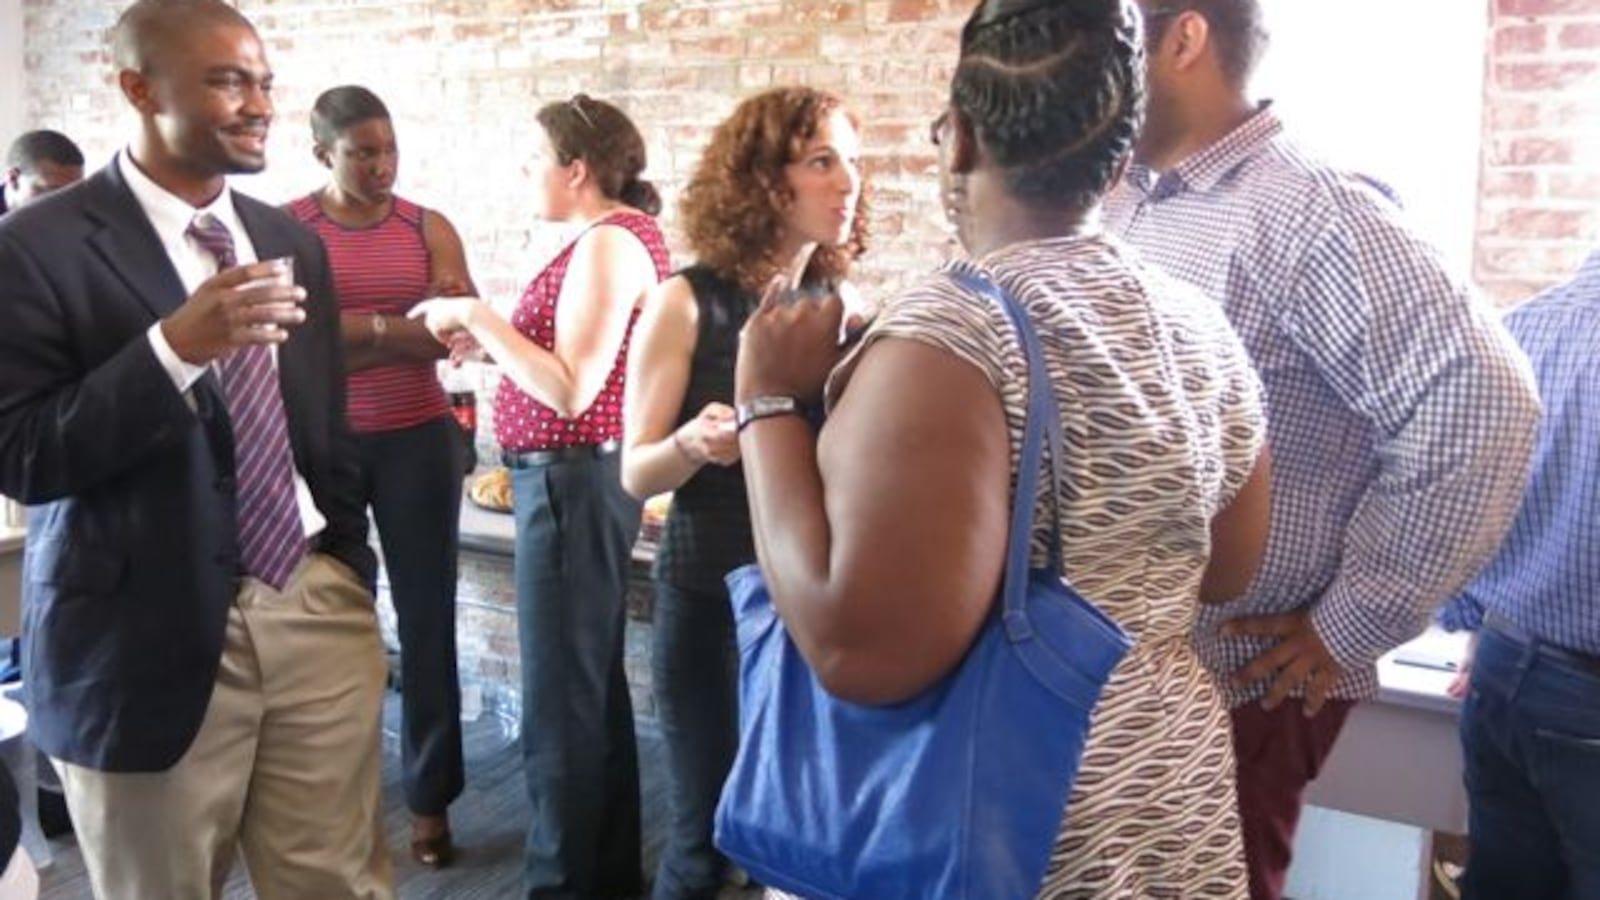 Daarel and Elizabeth chat with guests during the Meet and Greet on May 22.